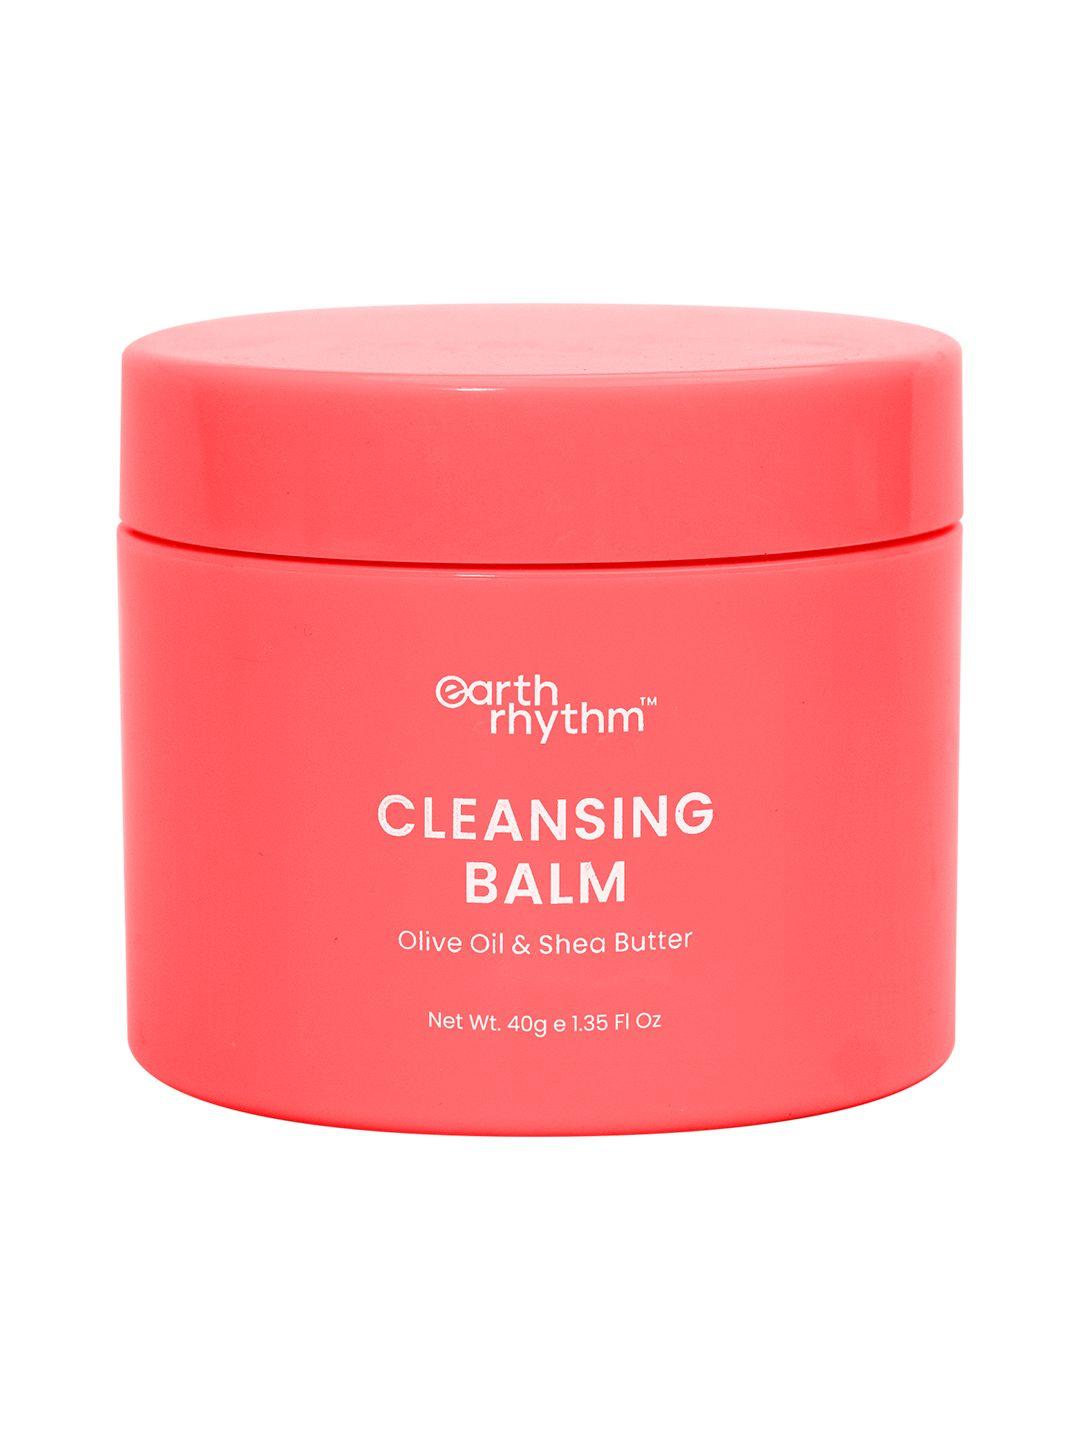 earth rhythm olive oil & shea butter cleansing balm - 40g